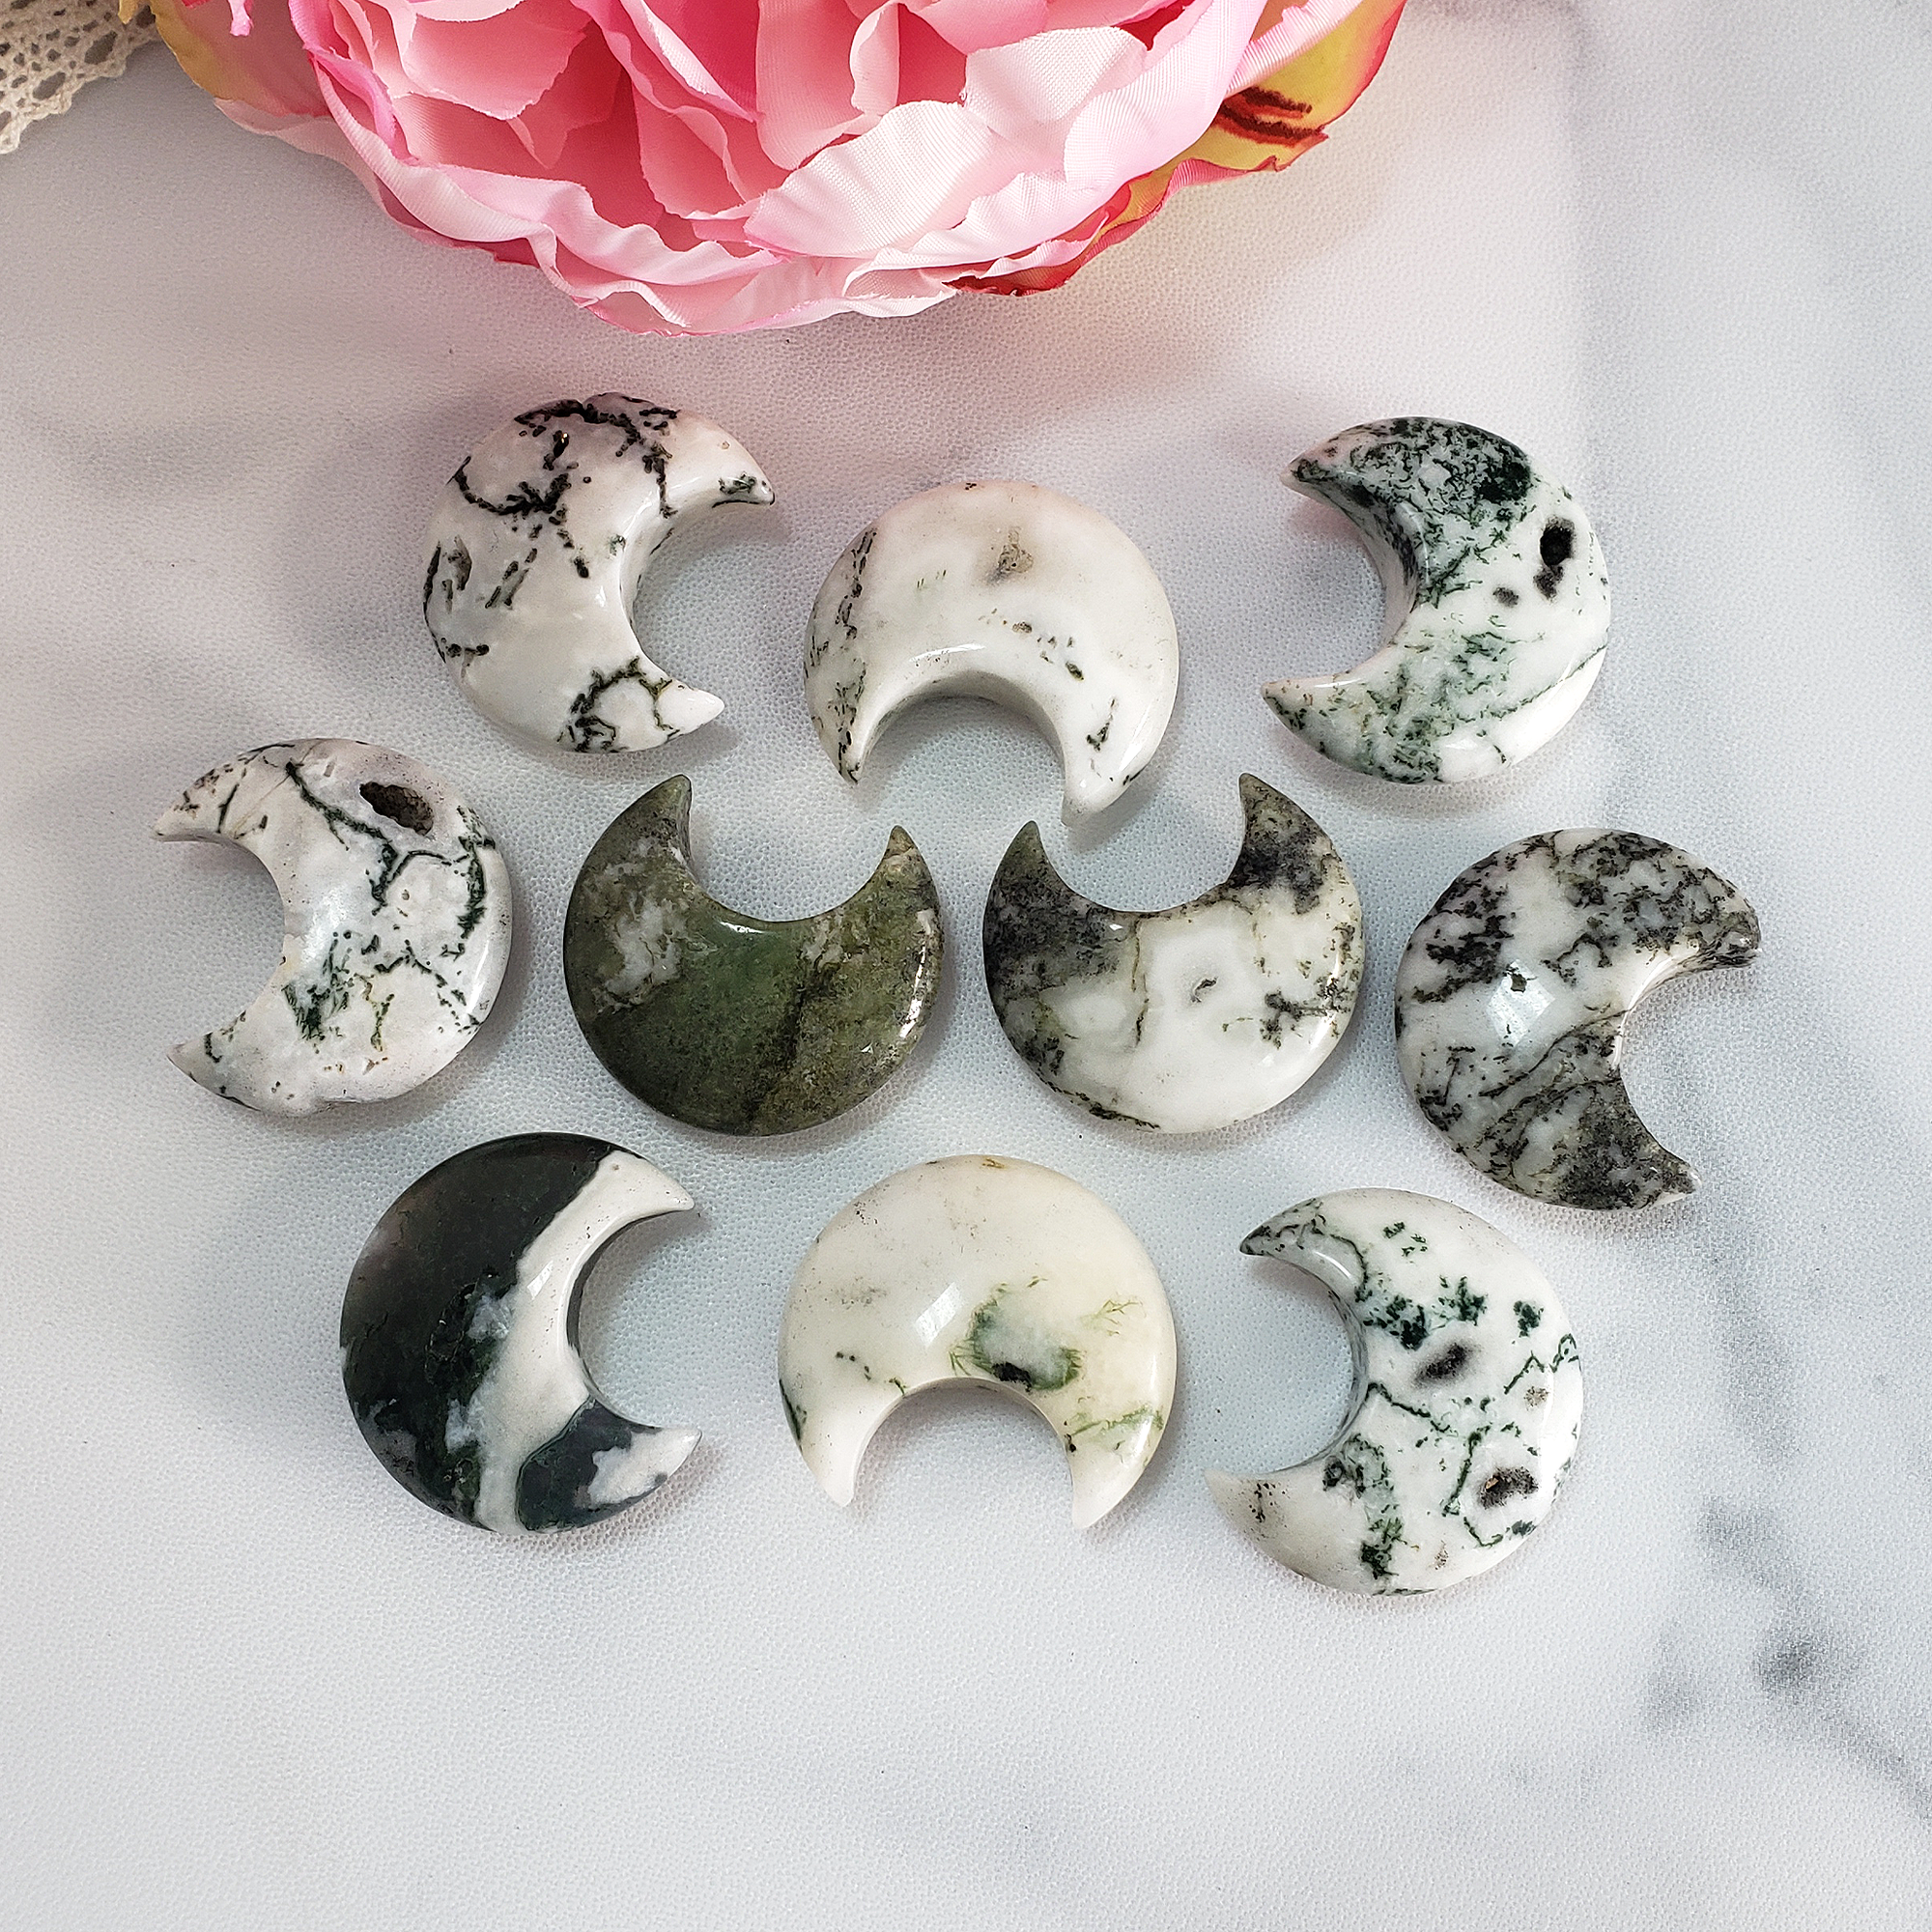 Tree Agate Natural Gemstone Crescent Moon Carving Fidget Stone - Moss Agate Tree Agate Crystal Worry Stones